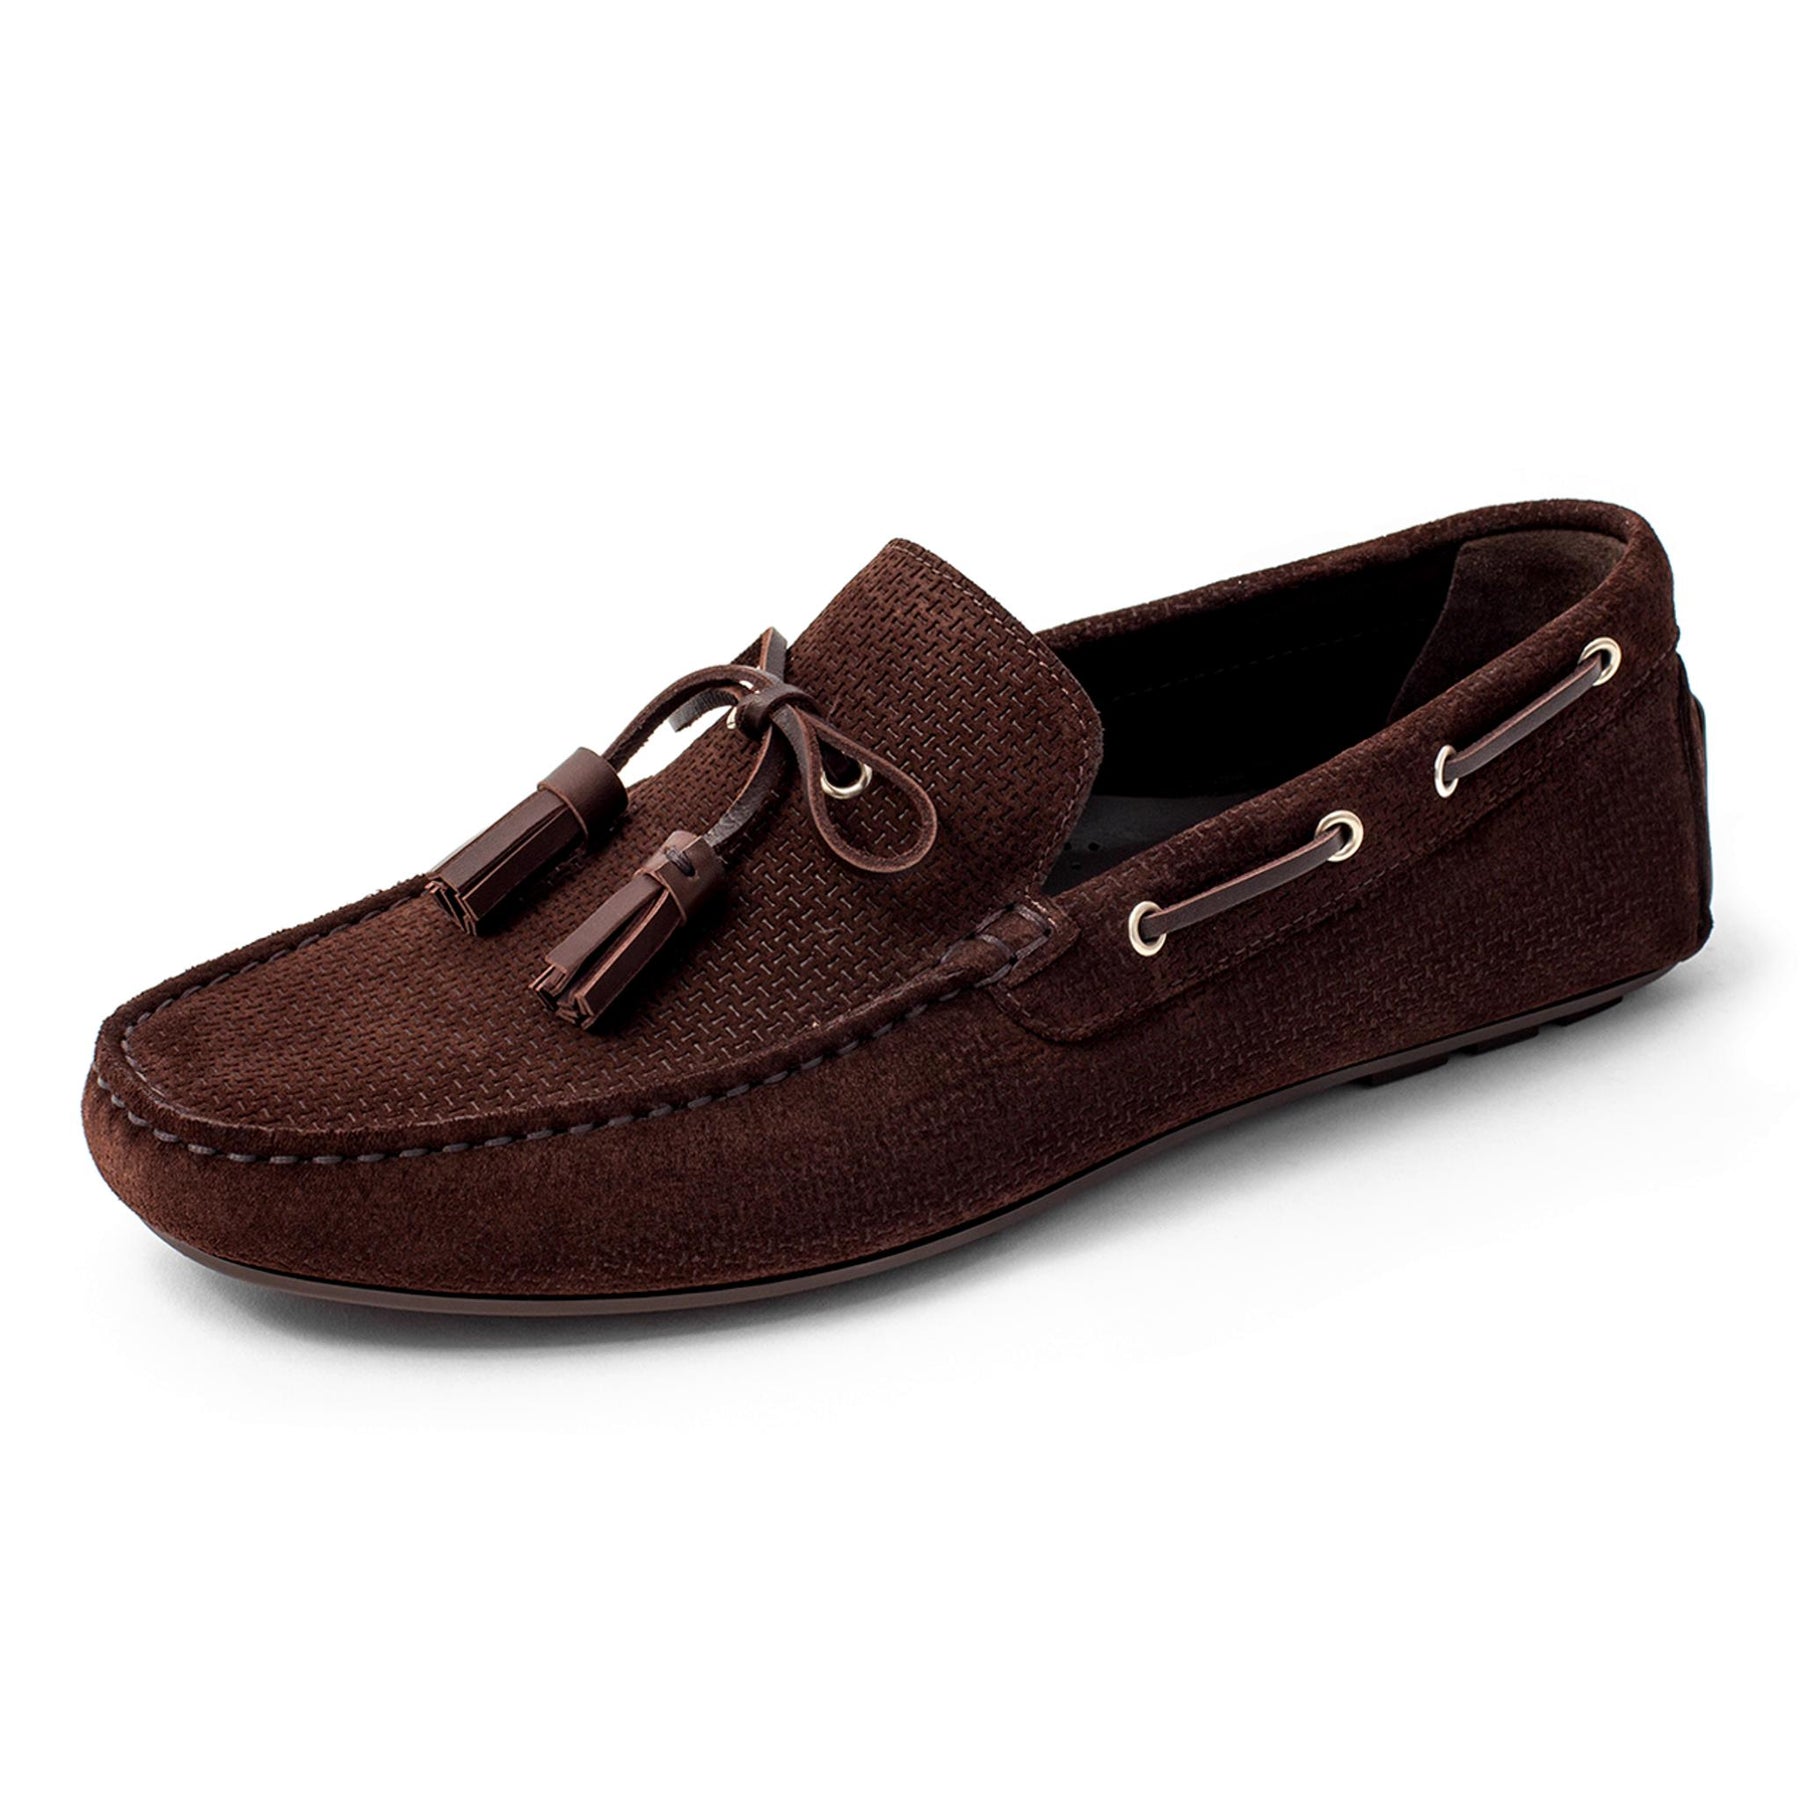 Prominence Suede With Tassels Moccasin | Dark Brown